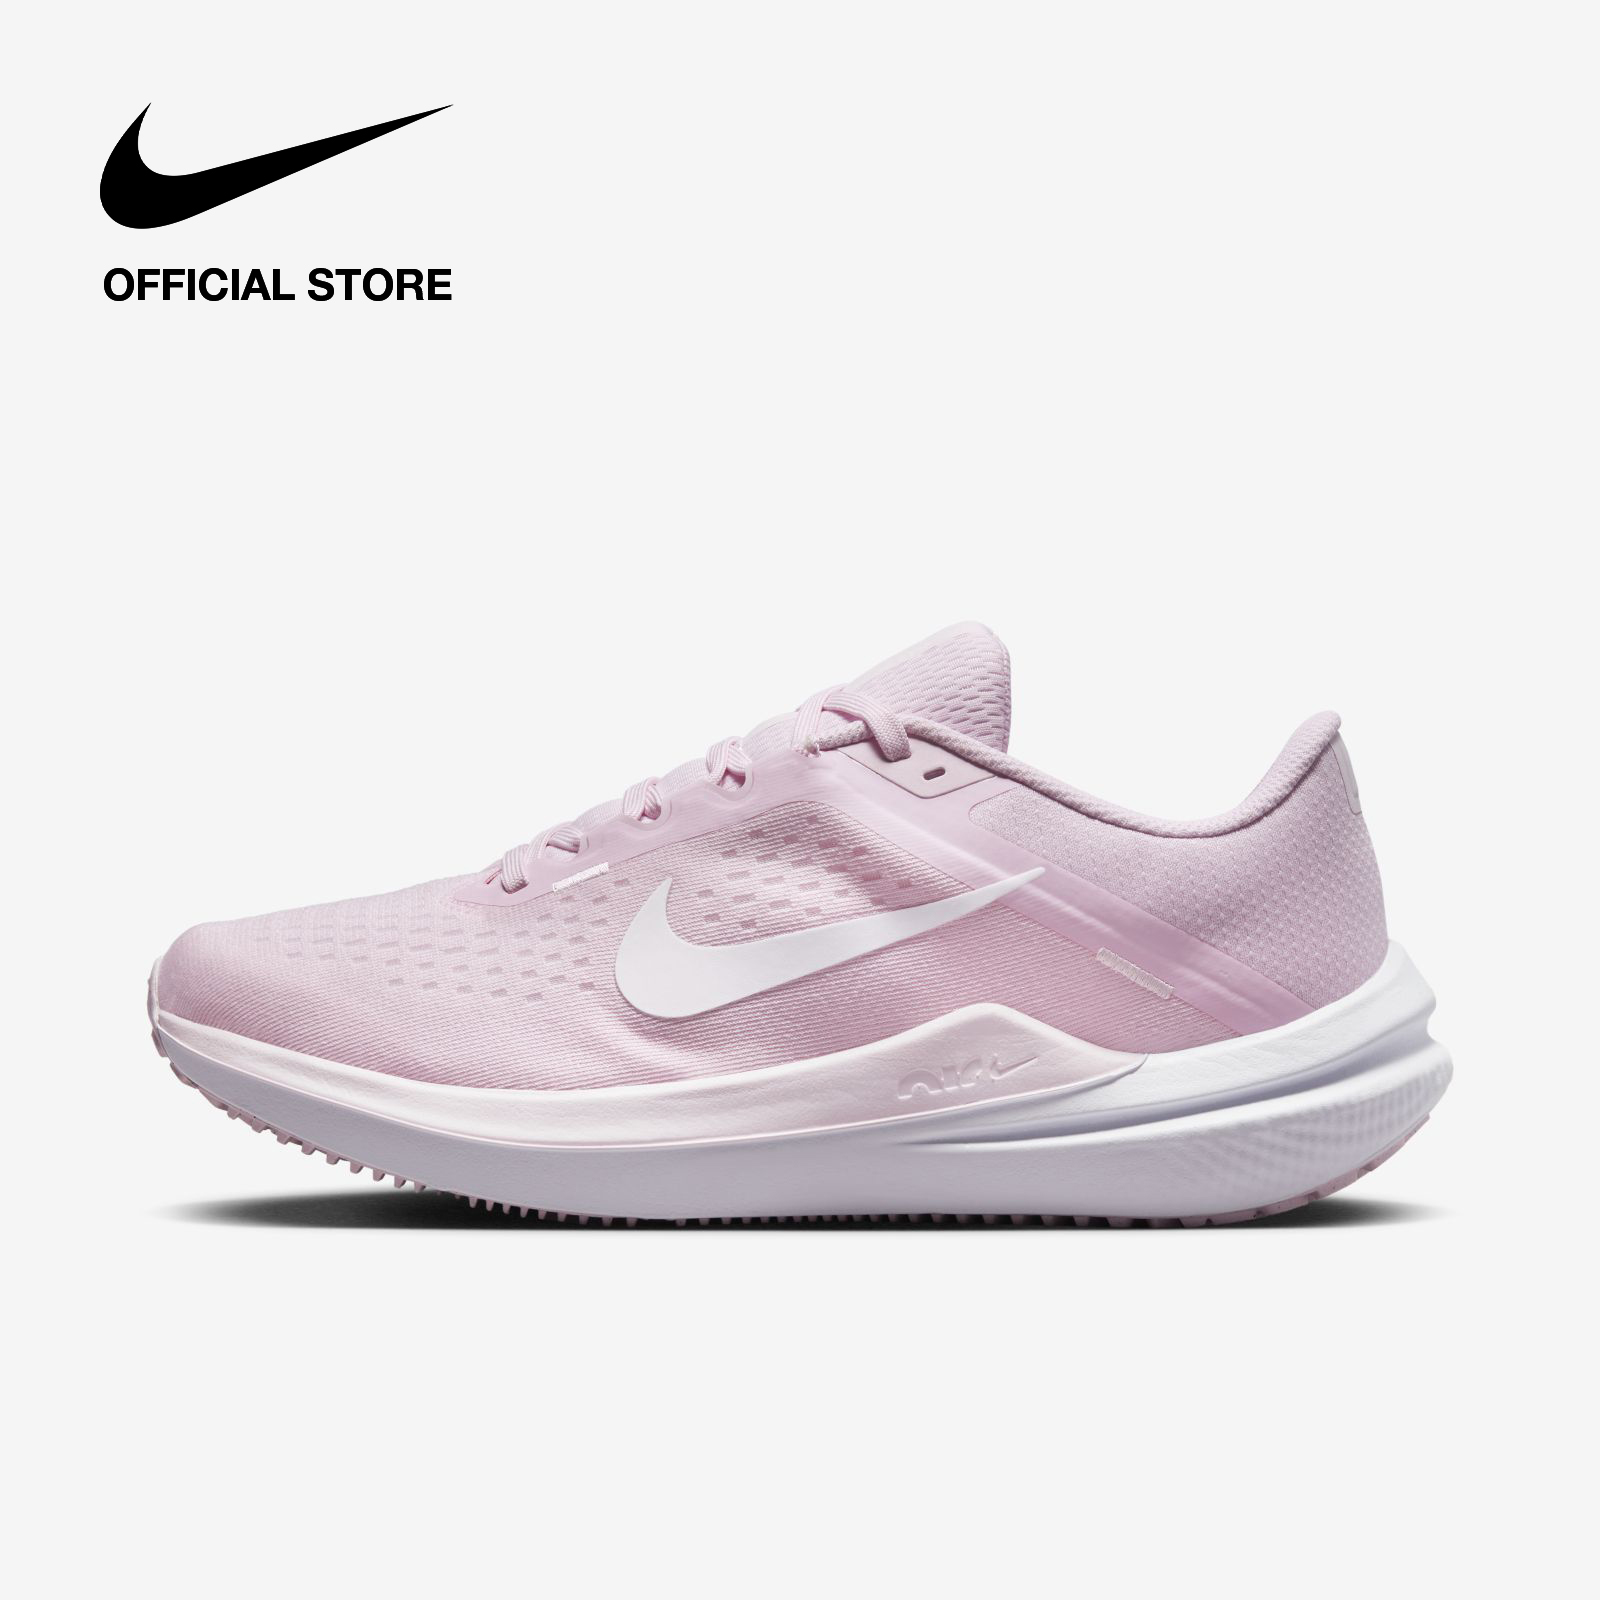 Update 151+ nike official shoes super hot